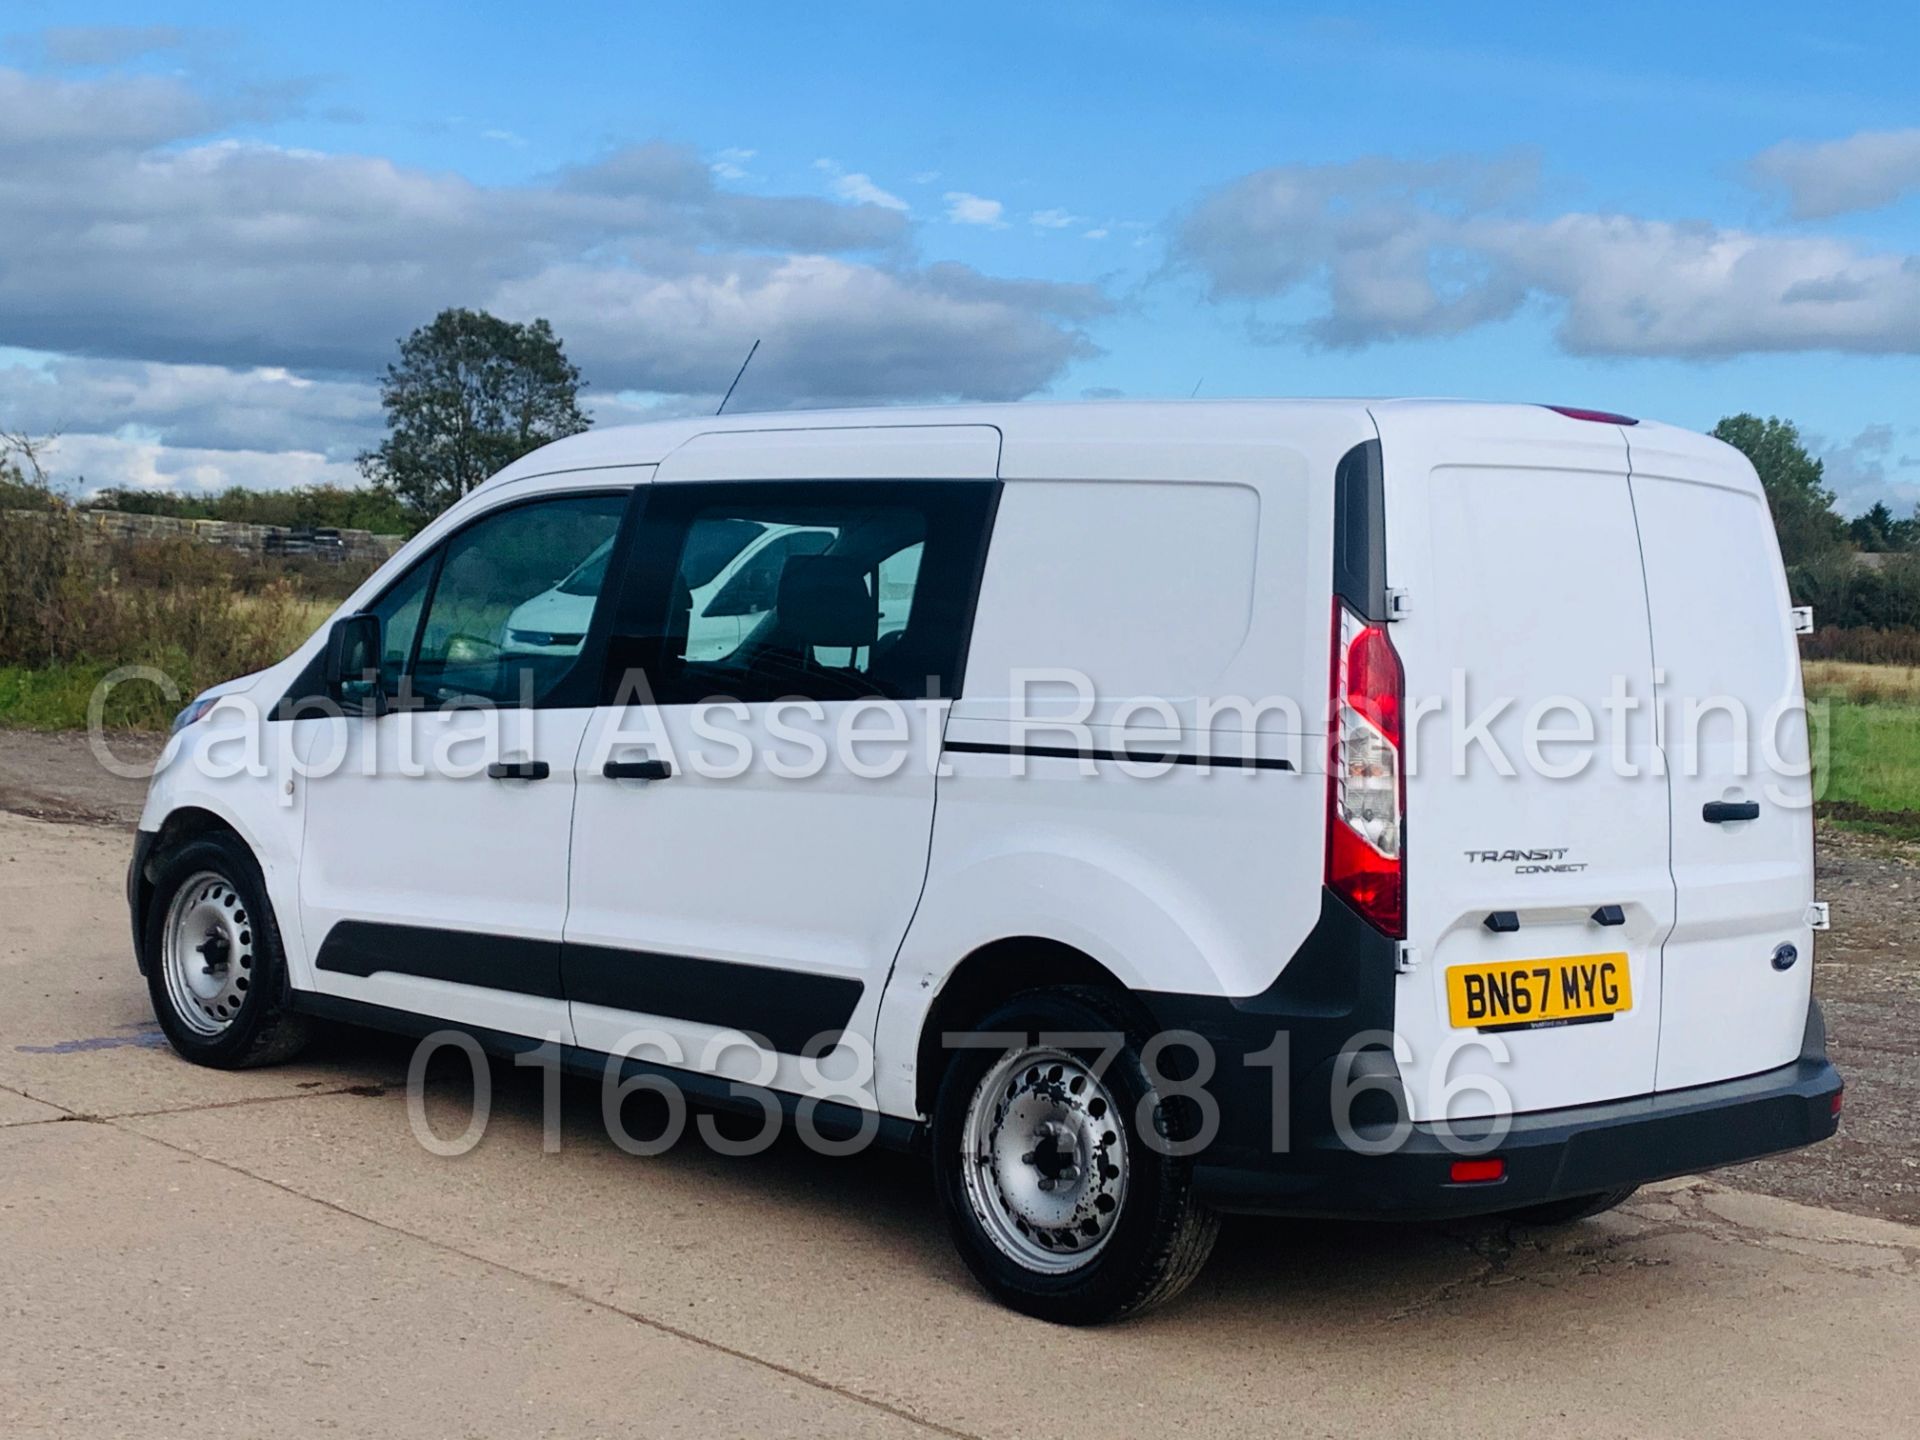 (ON SALE) FORD TRANSIT CONNECT *LWB - 5 SEATER CREW VAN* (2018 - EURO 6) 1.5 TDCI *A/C* (1 OWNER) - Image 6 of 40